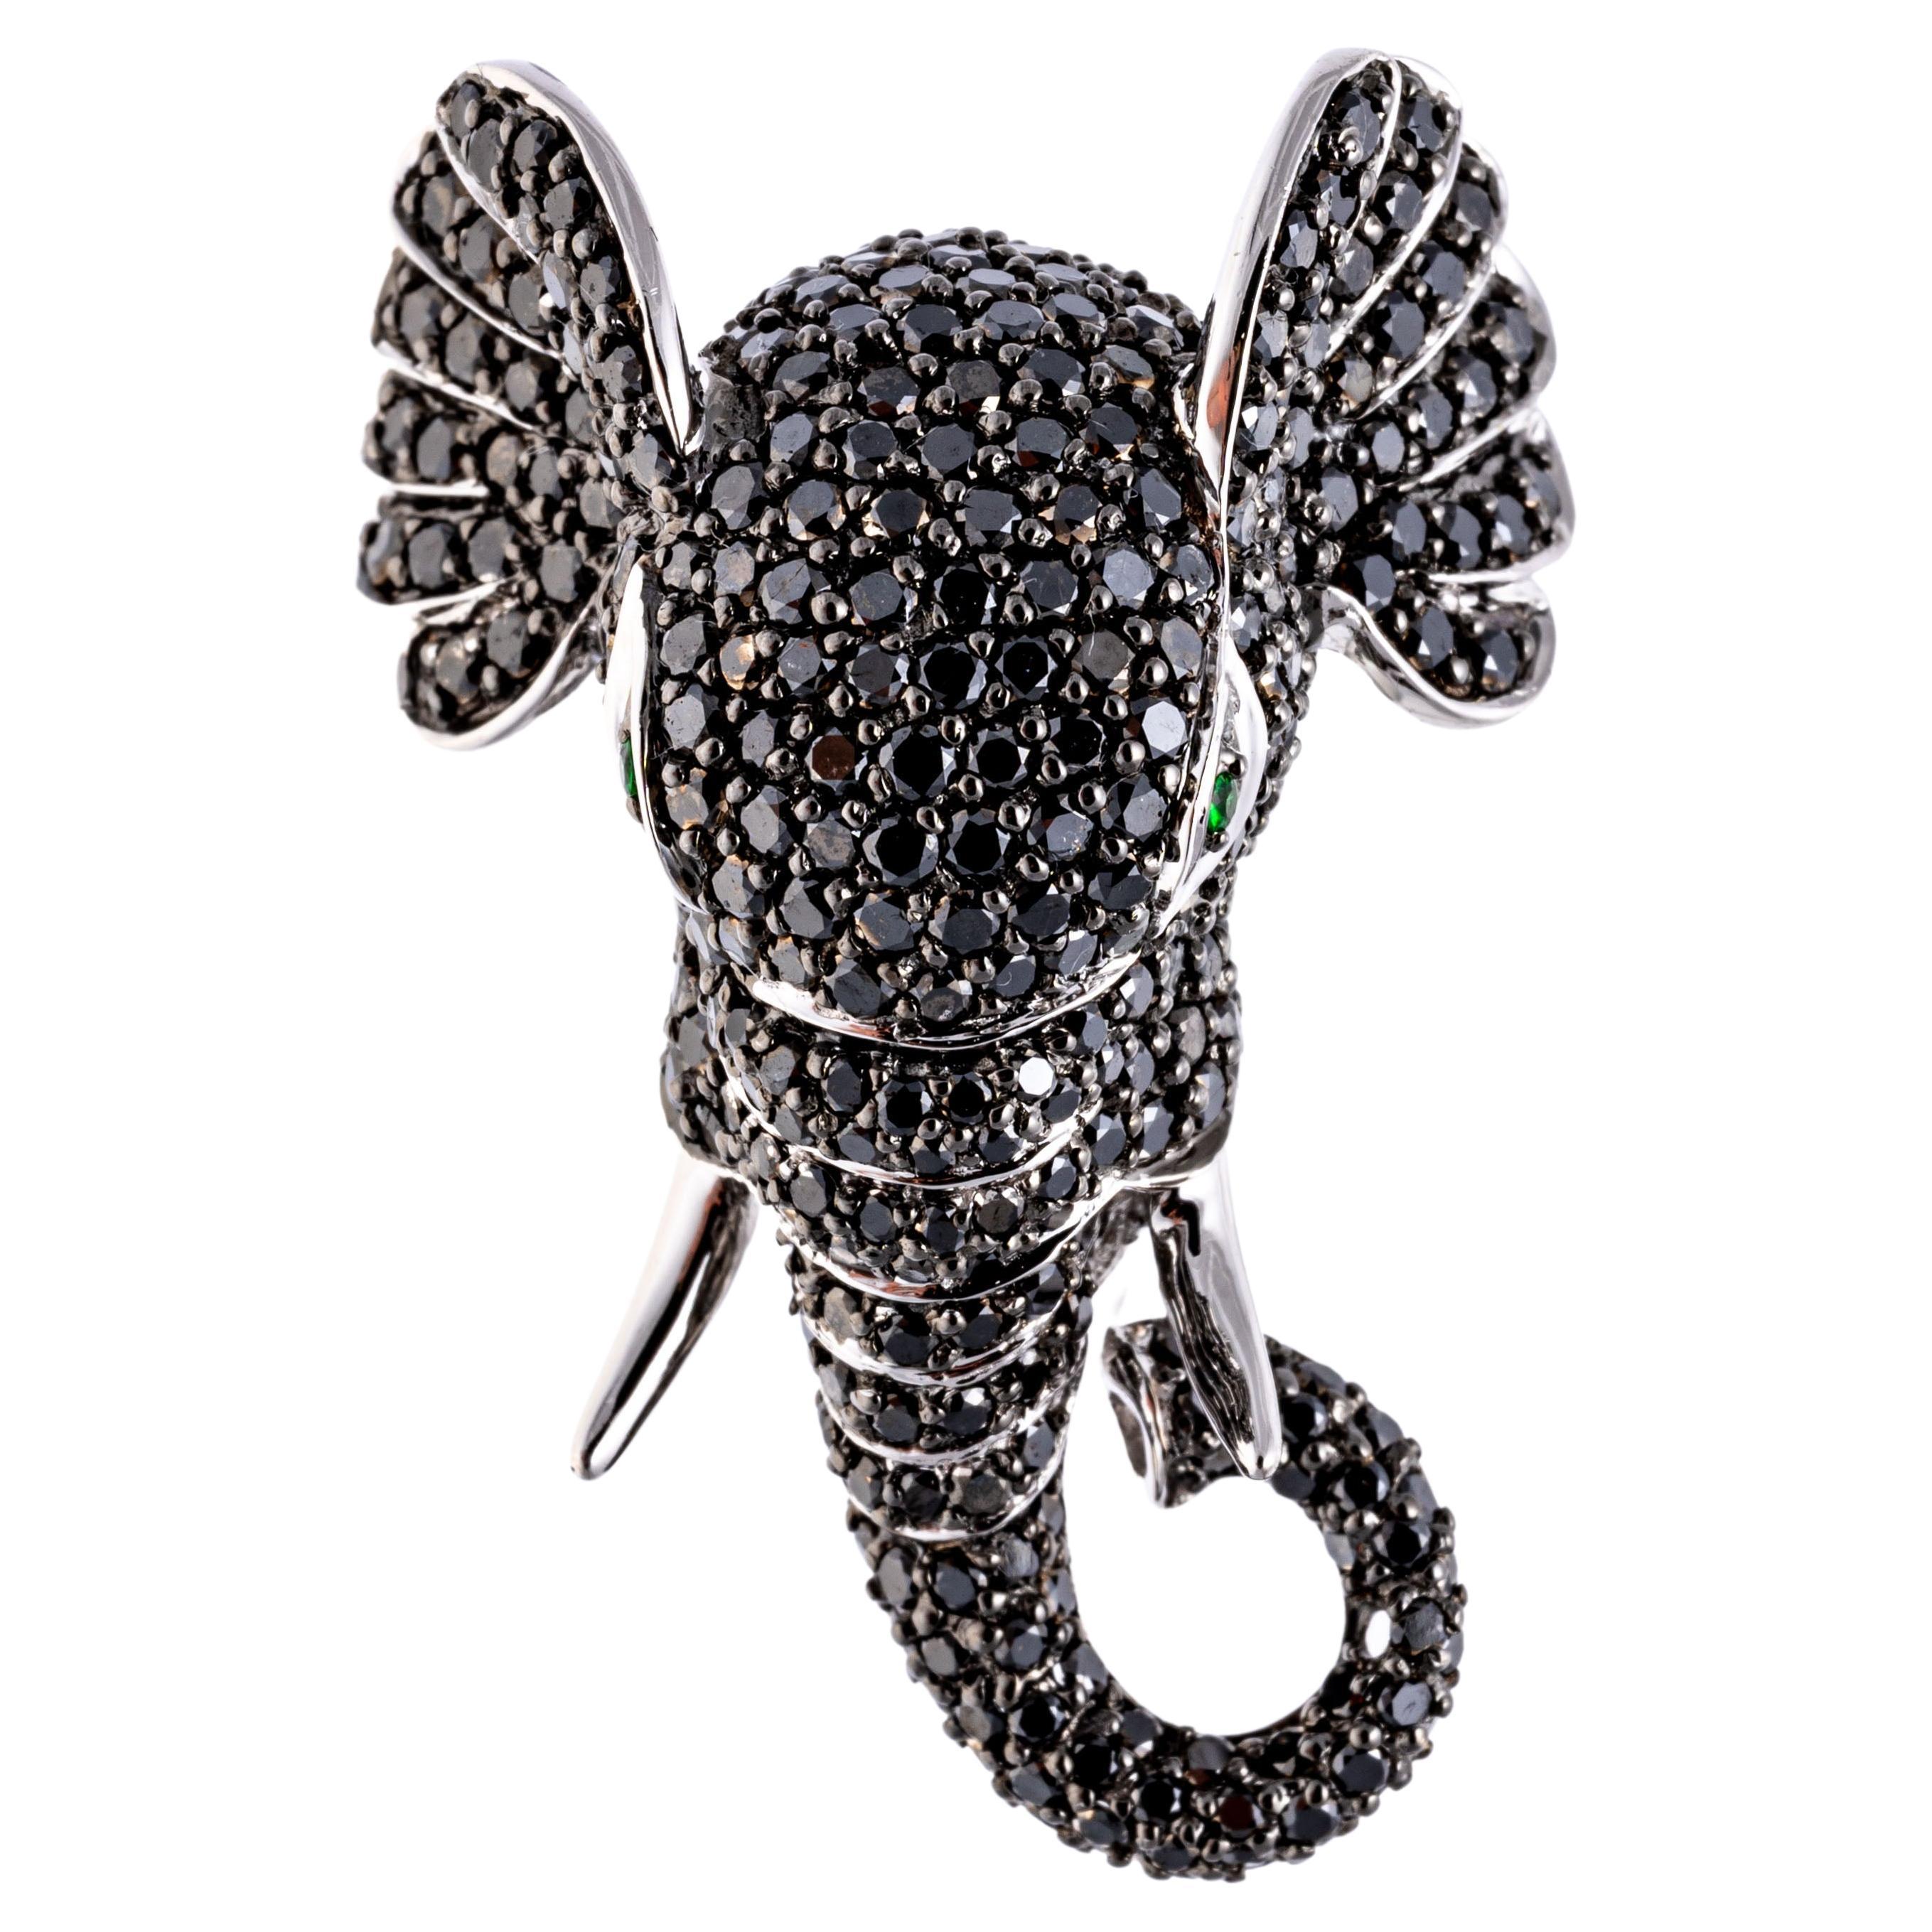 14k white gold ring. This handsome ring is a regal figural elephant head,  trimmed in the entirety with pave set, round faceted black diamonds, approximately 2.01 TCW.  Round faceted, bright green tsavorite garnets, approximately 0.04 TCW, set as